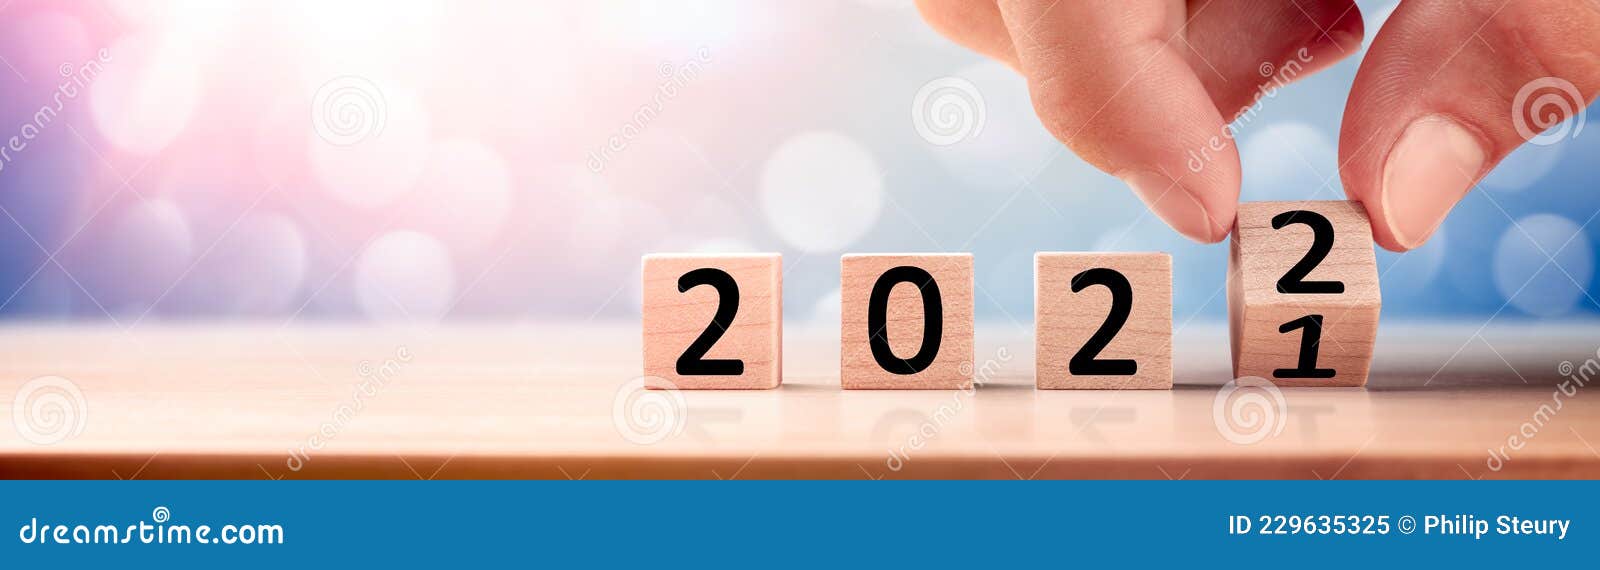 Mst Schedule 2022 Date Changing From 2021 To 2022 Stock Image - Image Of Countdown, Forecast:  229635325